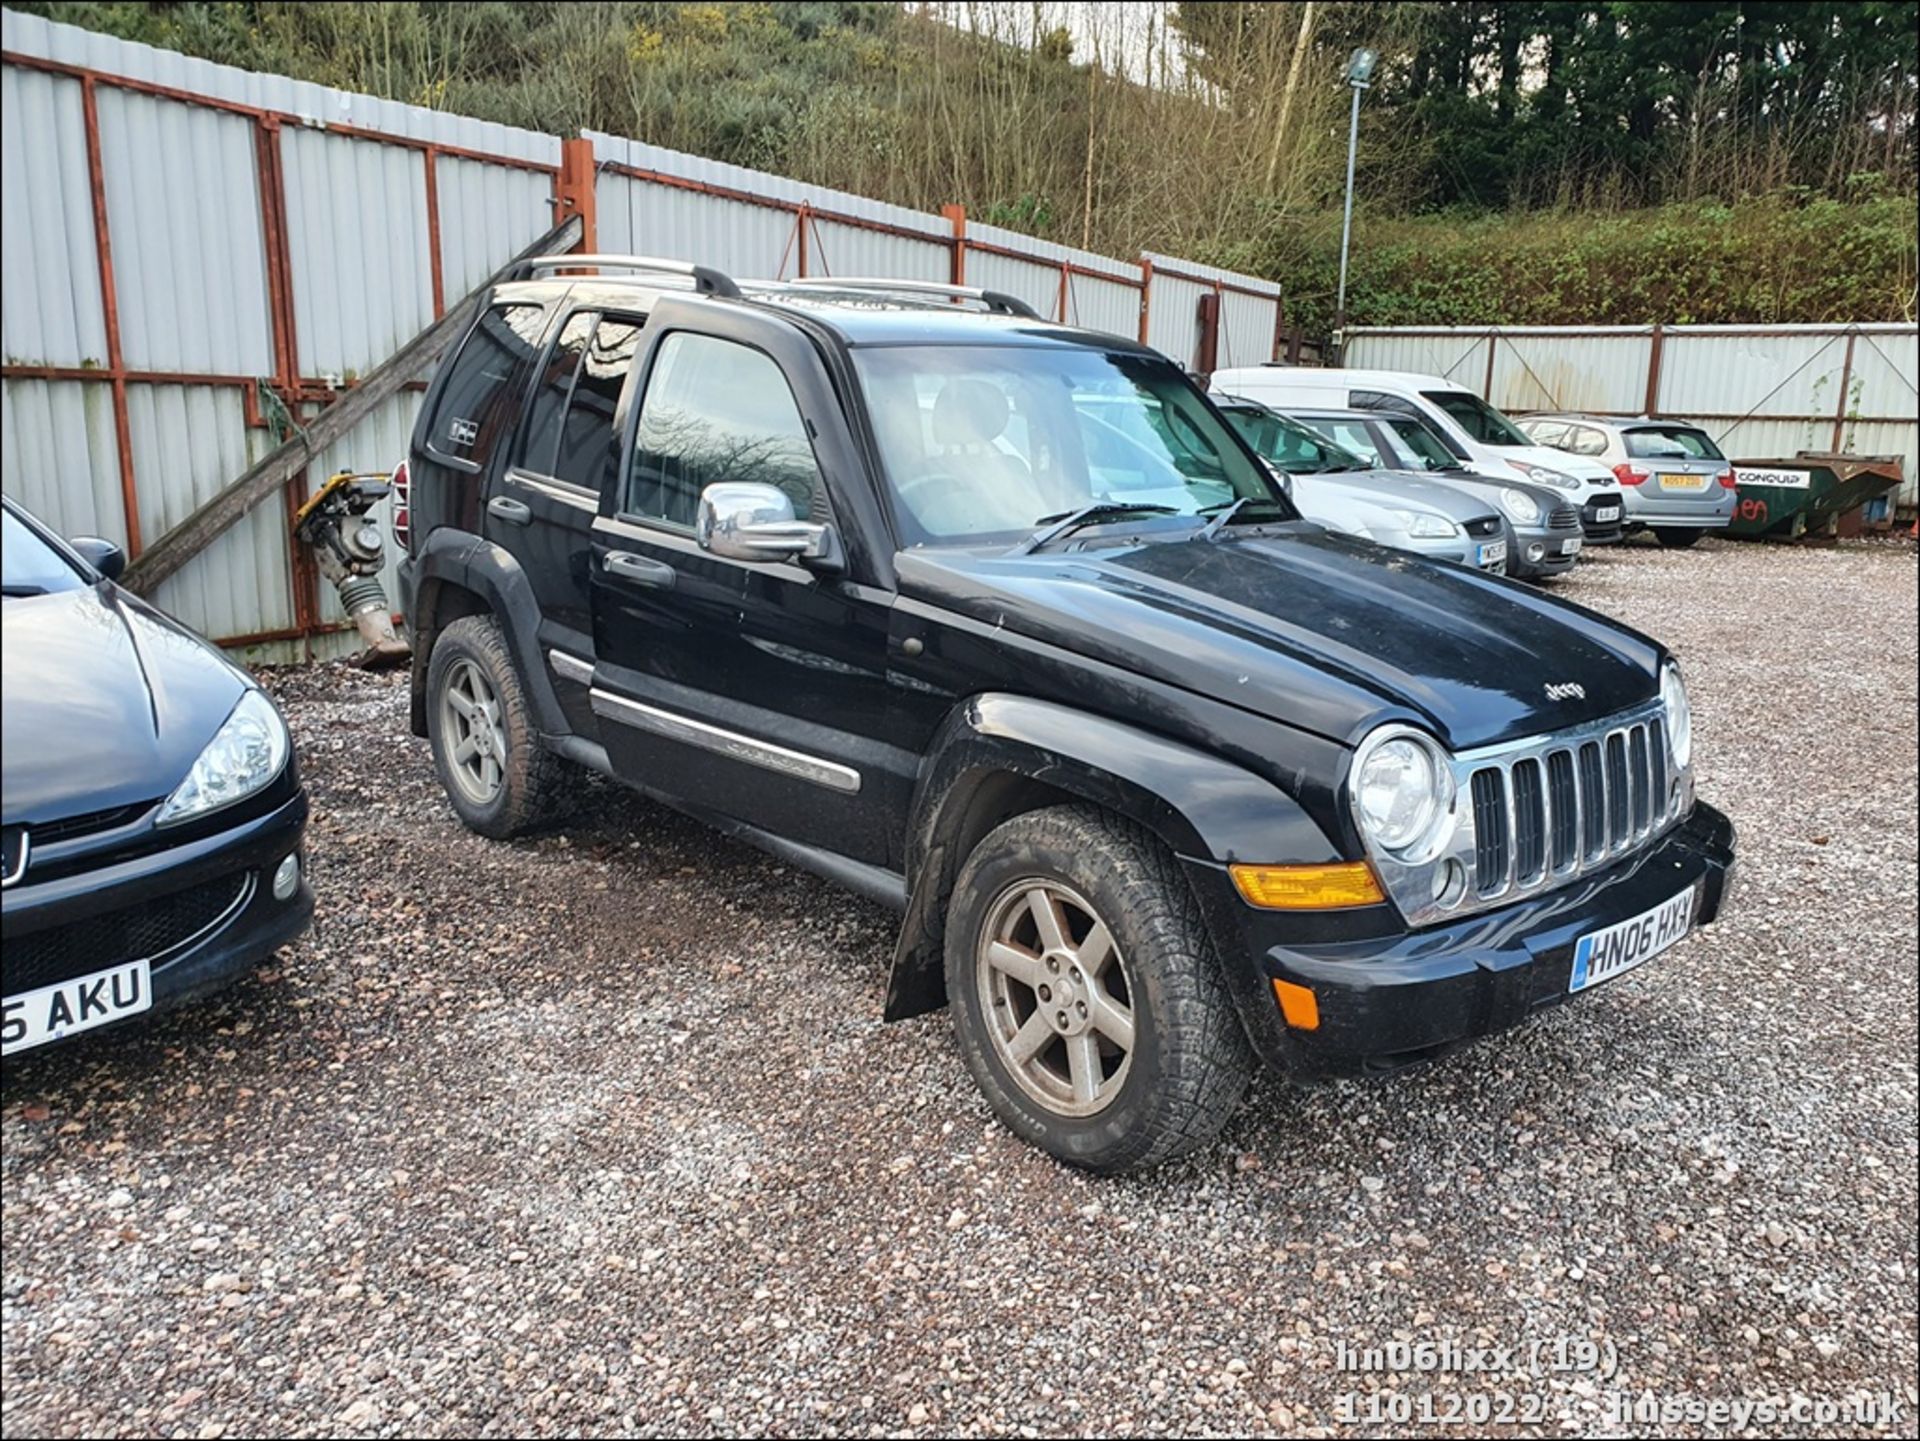 06/06 JEEP CHEROKEE LIMITED CRD - 2776cc 5dr Estate (Black, 98k) - Image 19 of 32